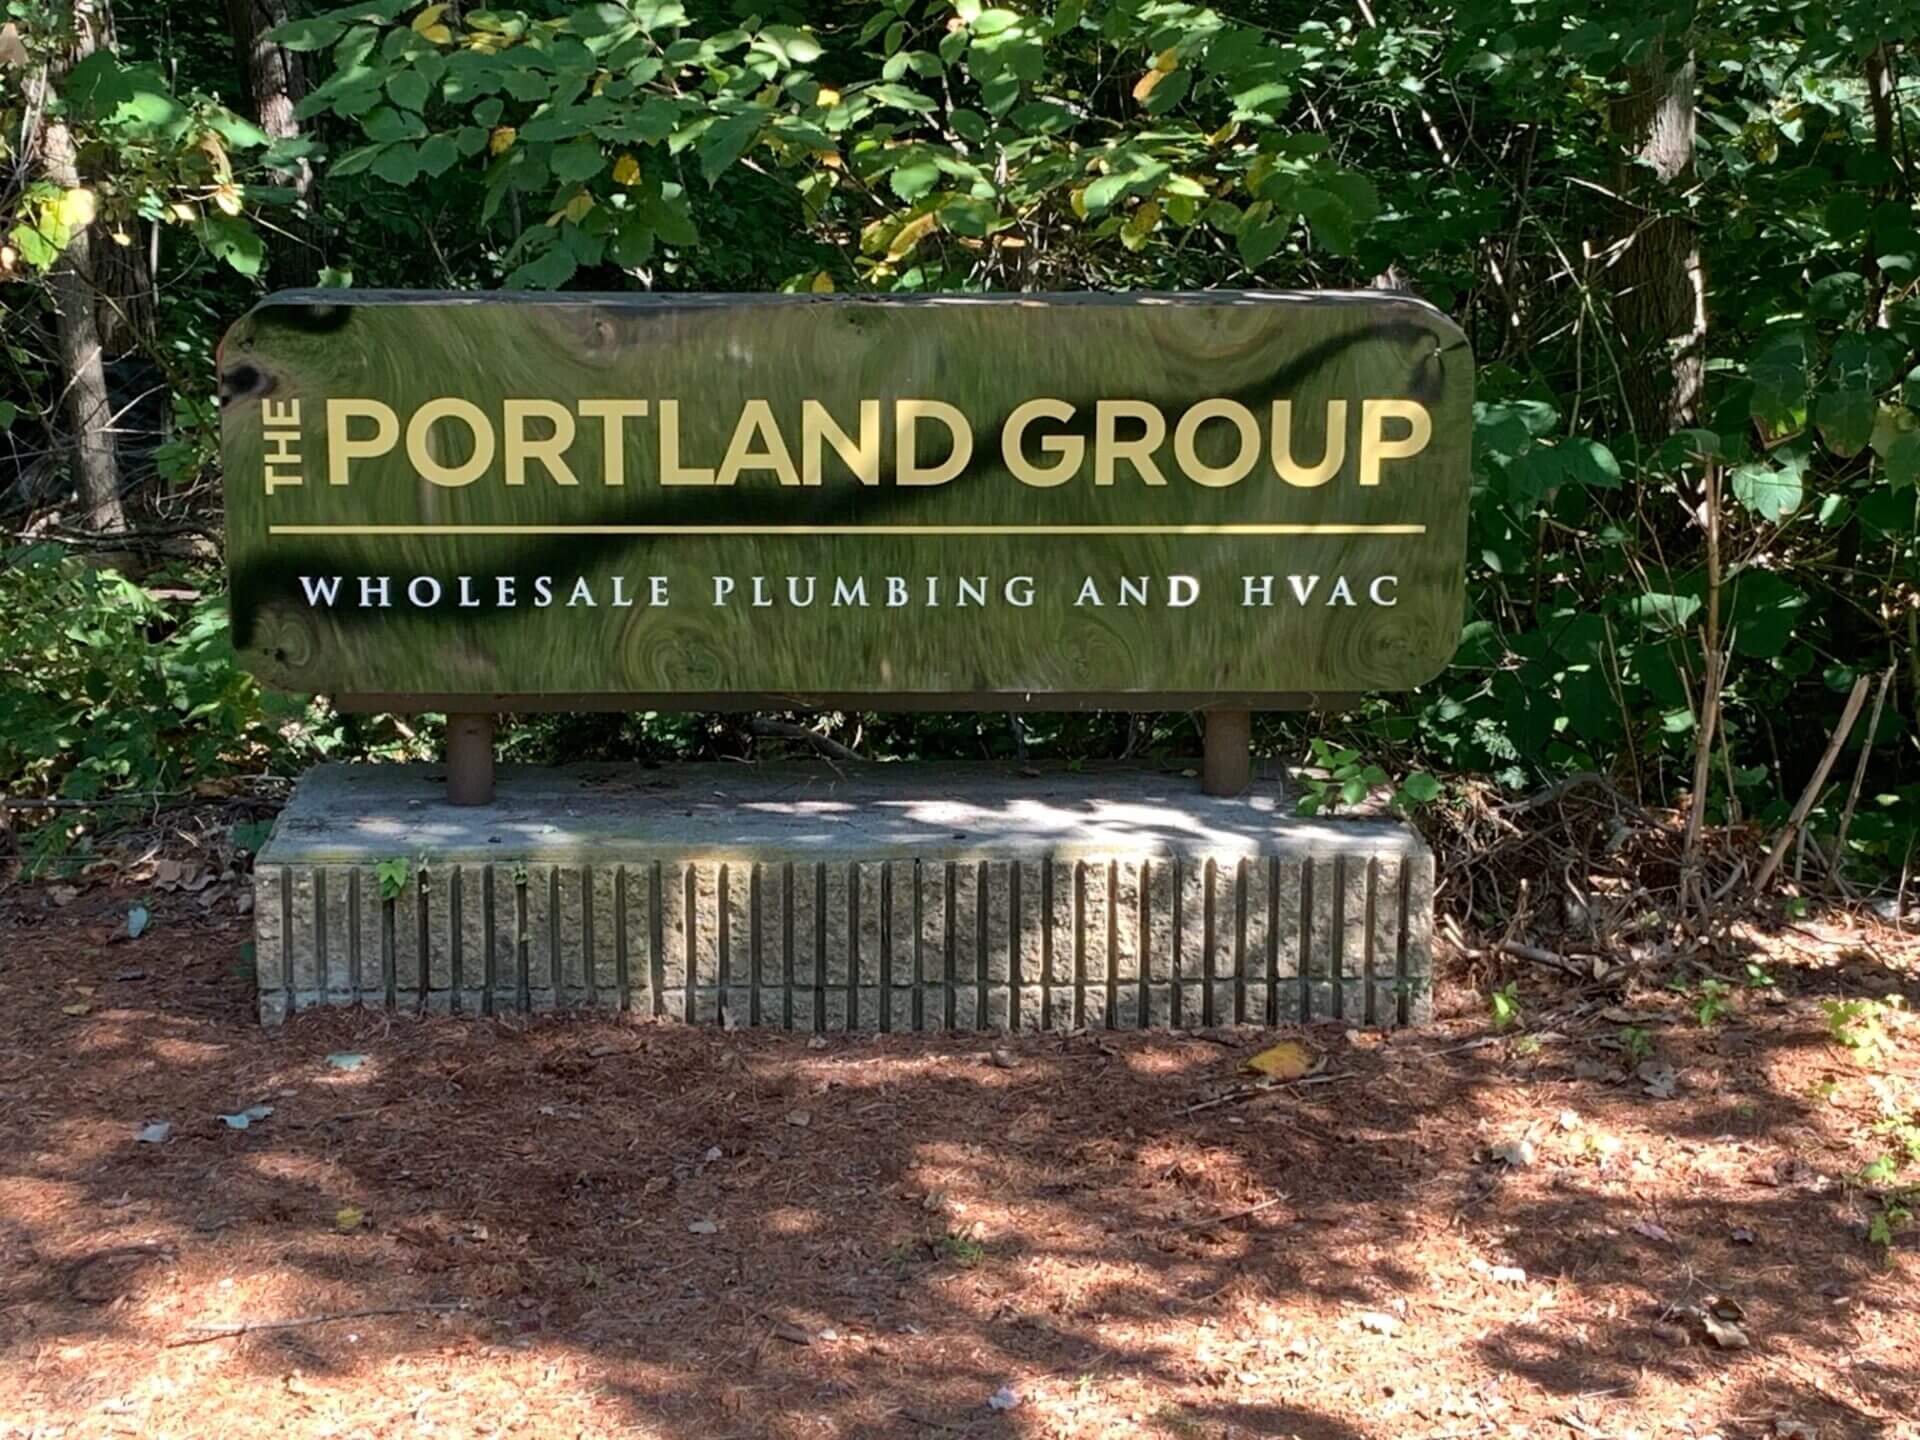 The Portland Group Board Outside for a Pathway